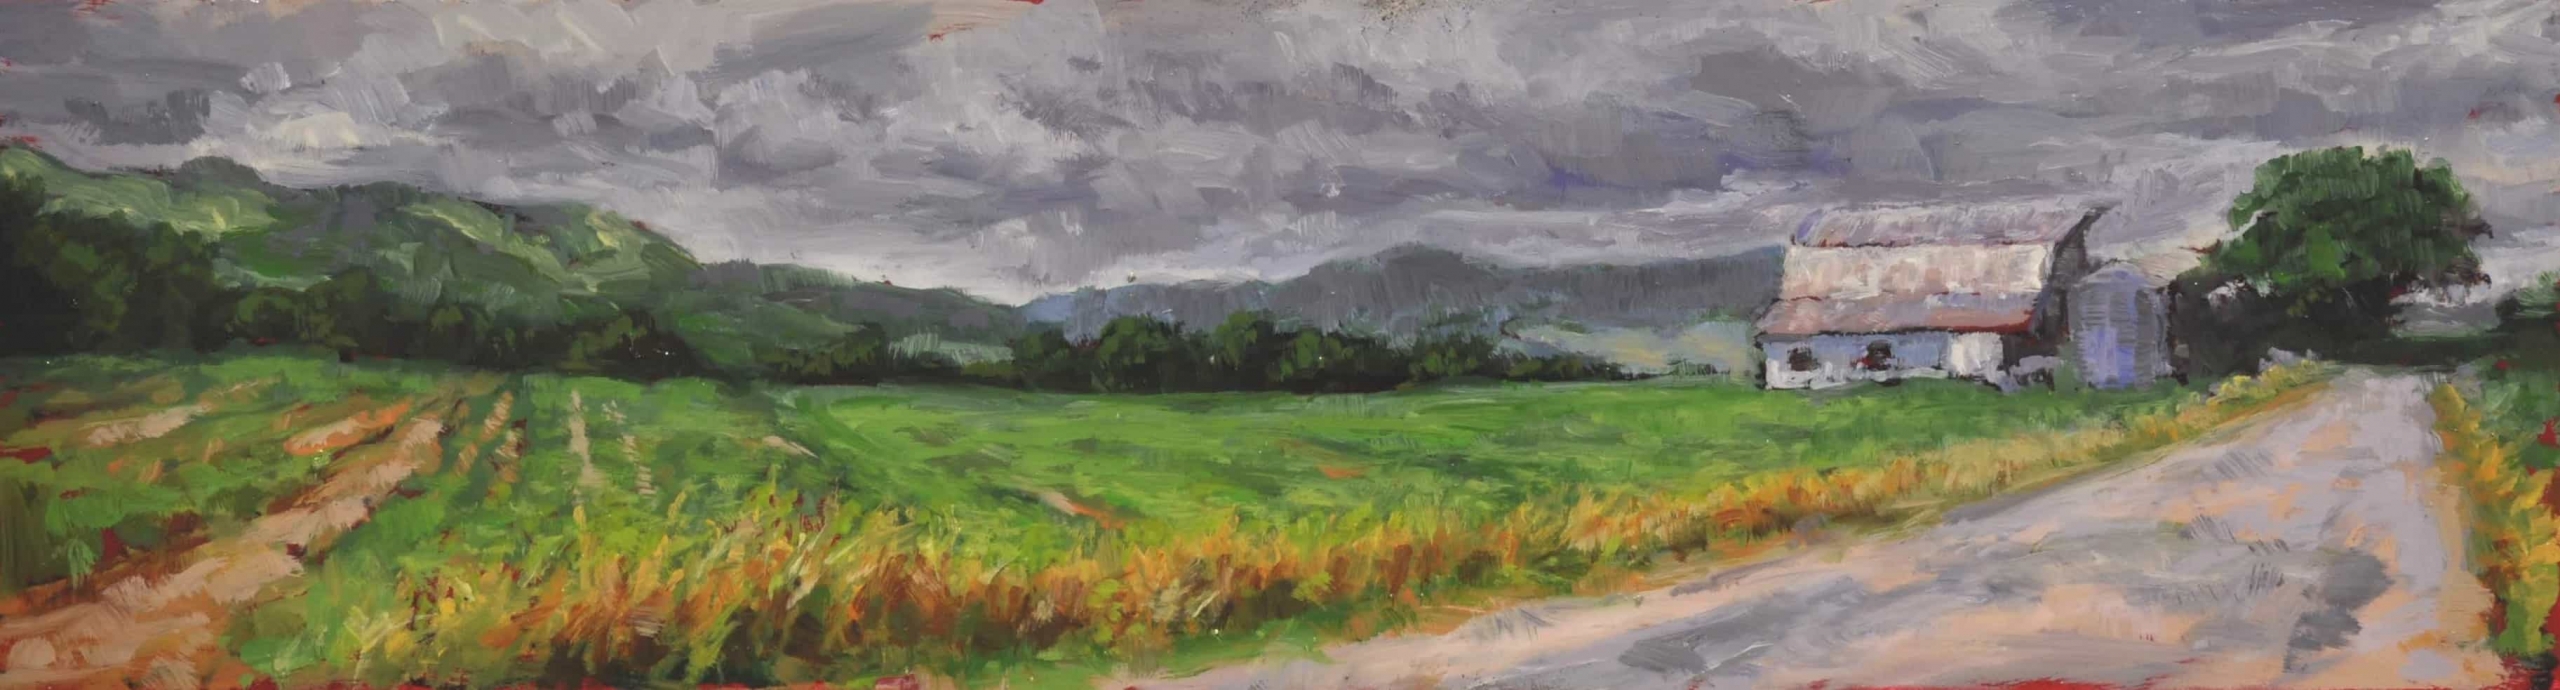 Kim Aerts oil painting - Farm and field near Norton - 3x12 inches